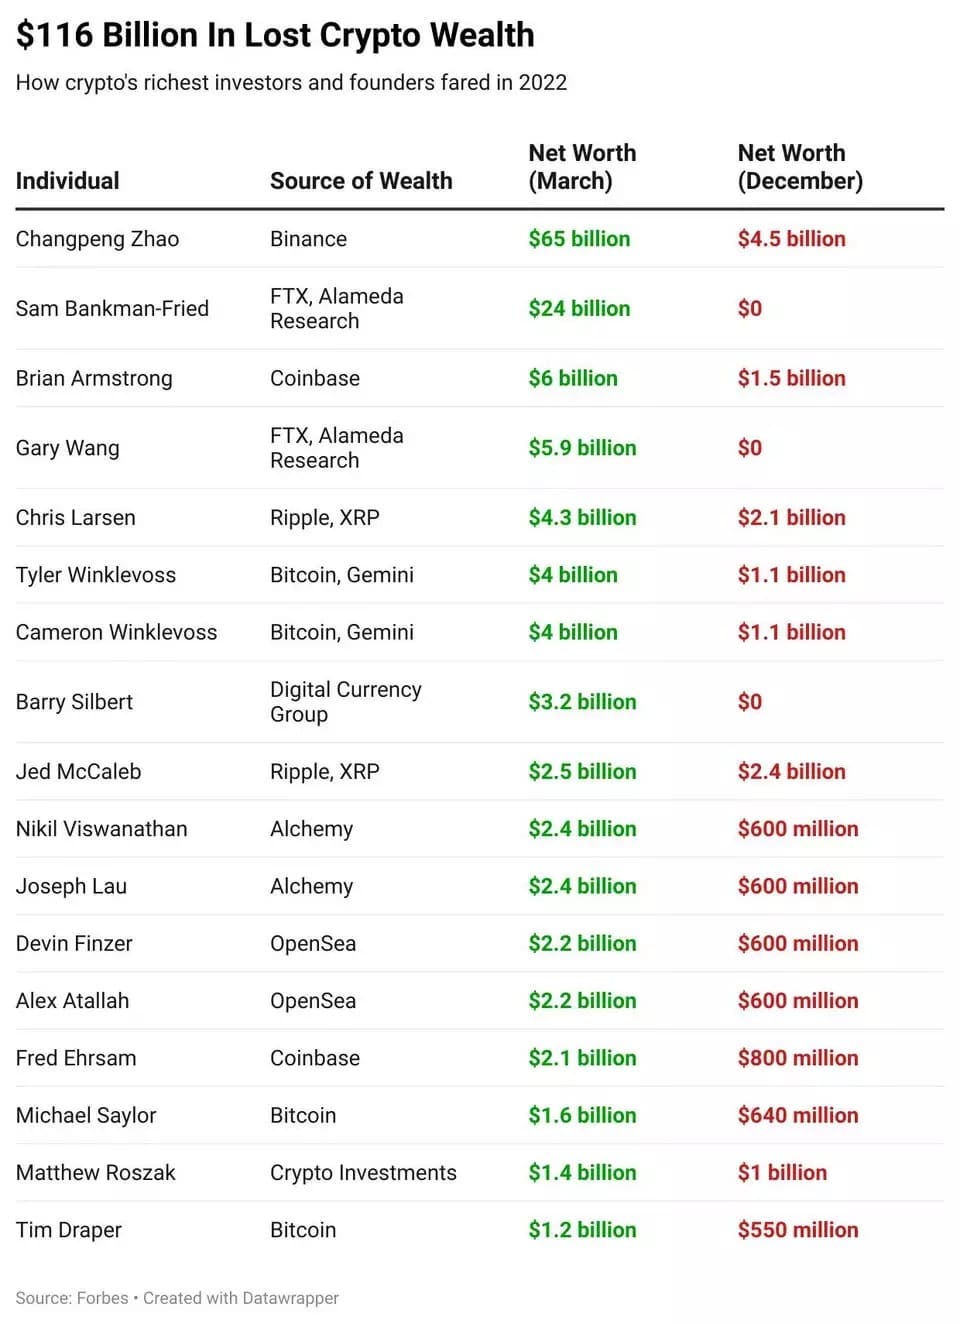 Financial losses of cryptocurrency ecosystem leaders according to Forbes